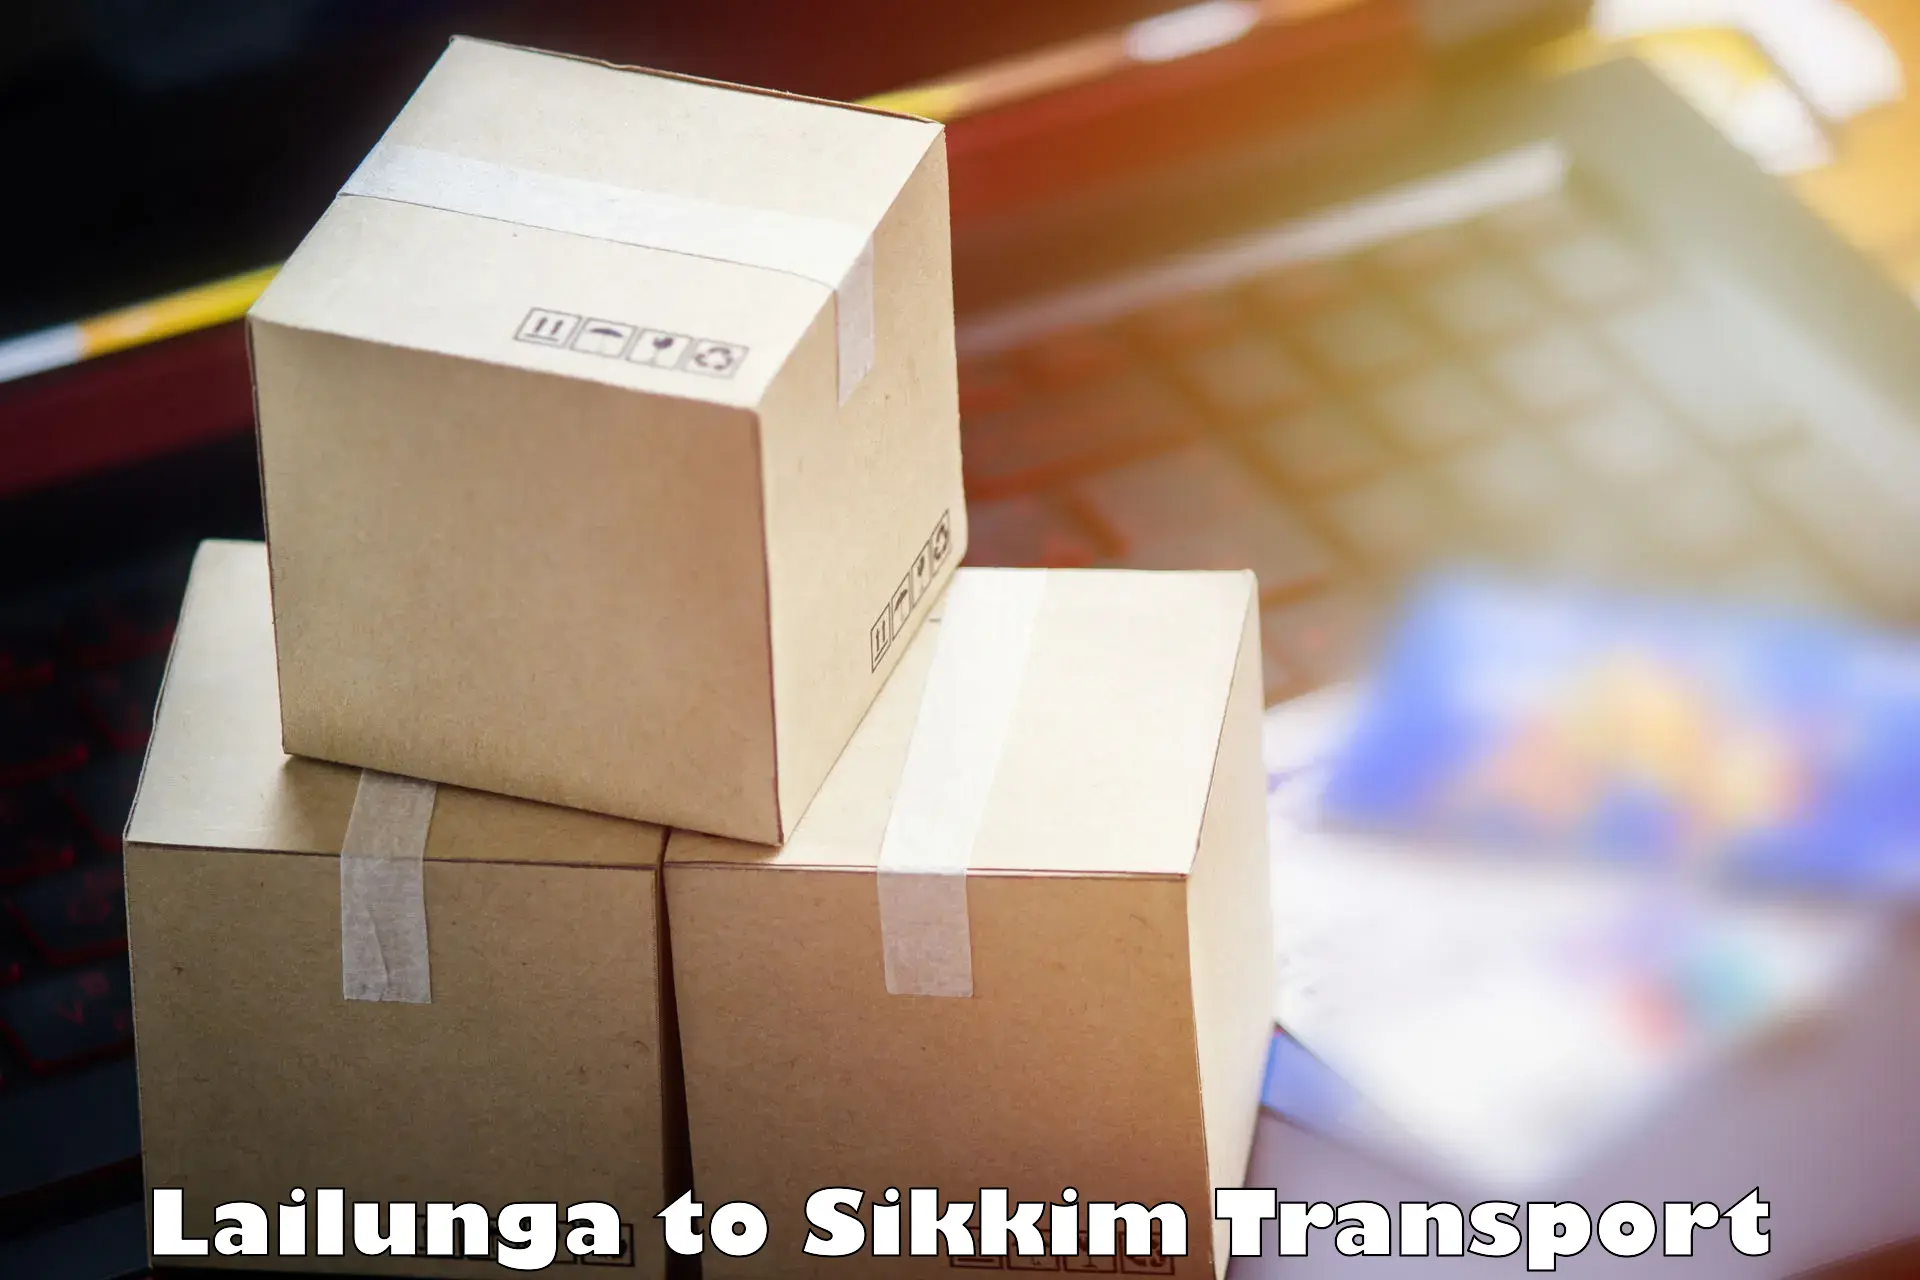 Express transport services Lailunga to Sikkim